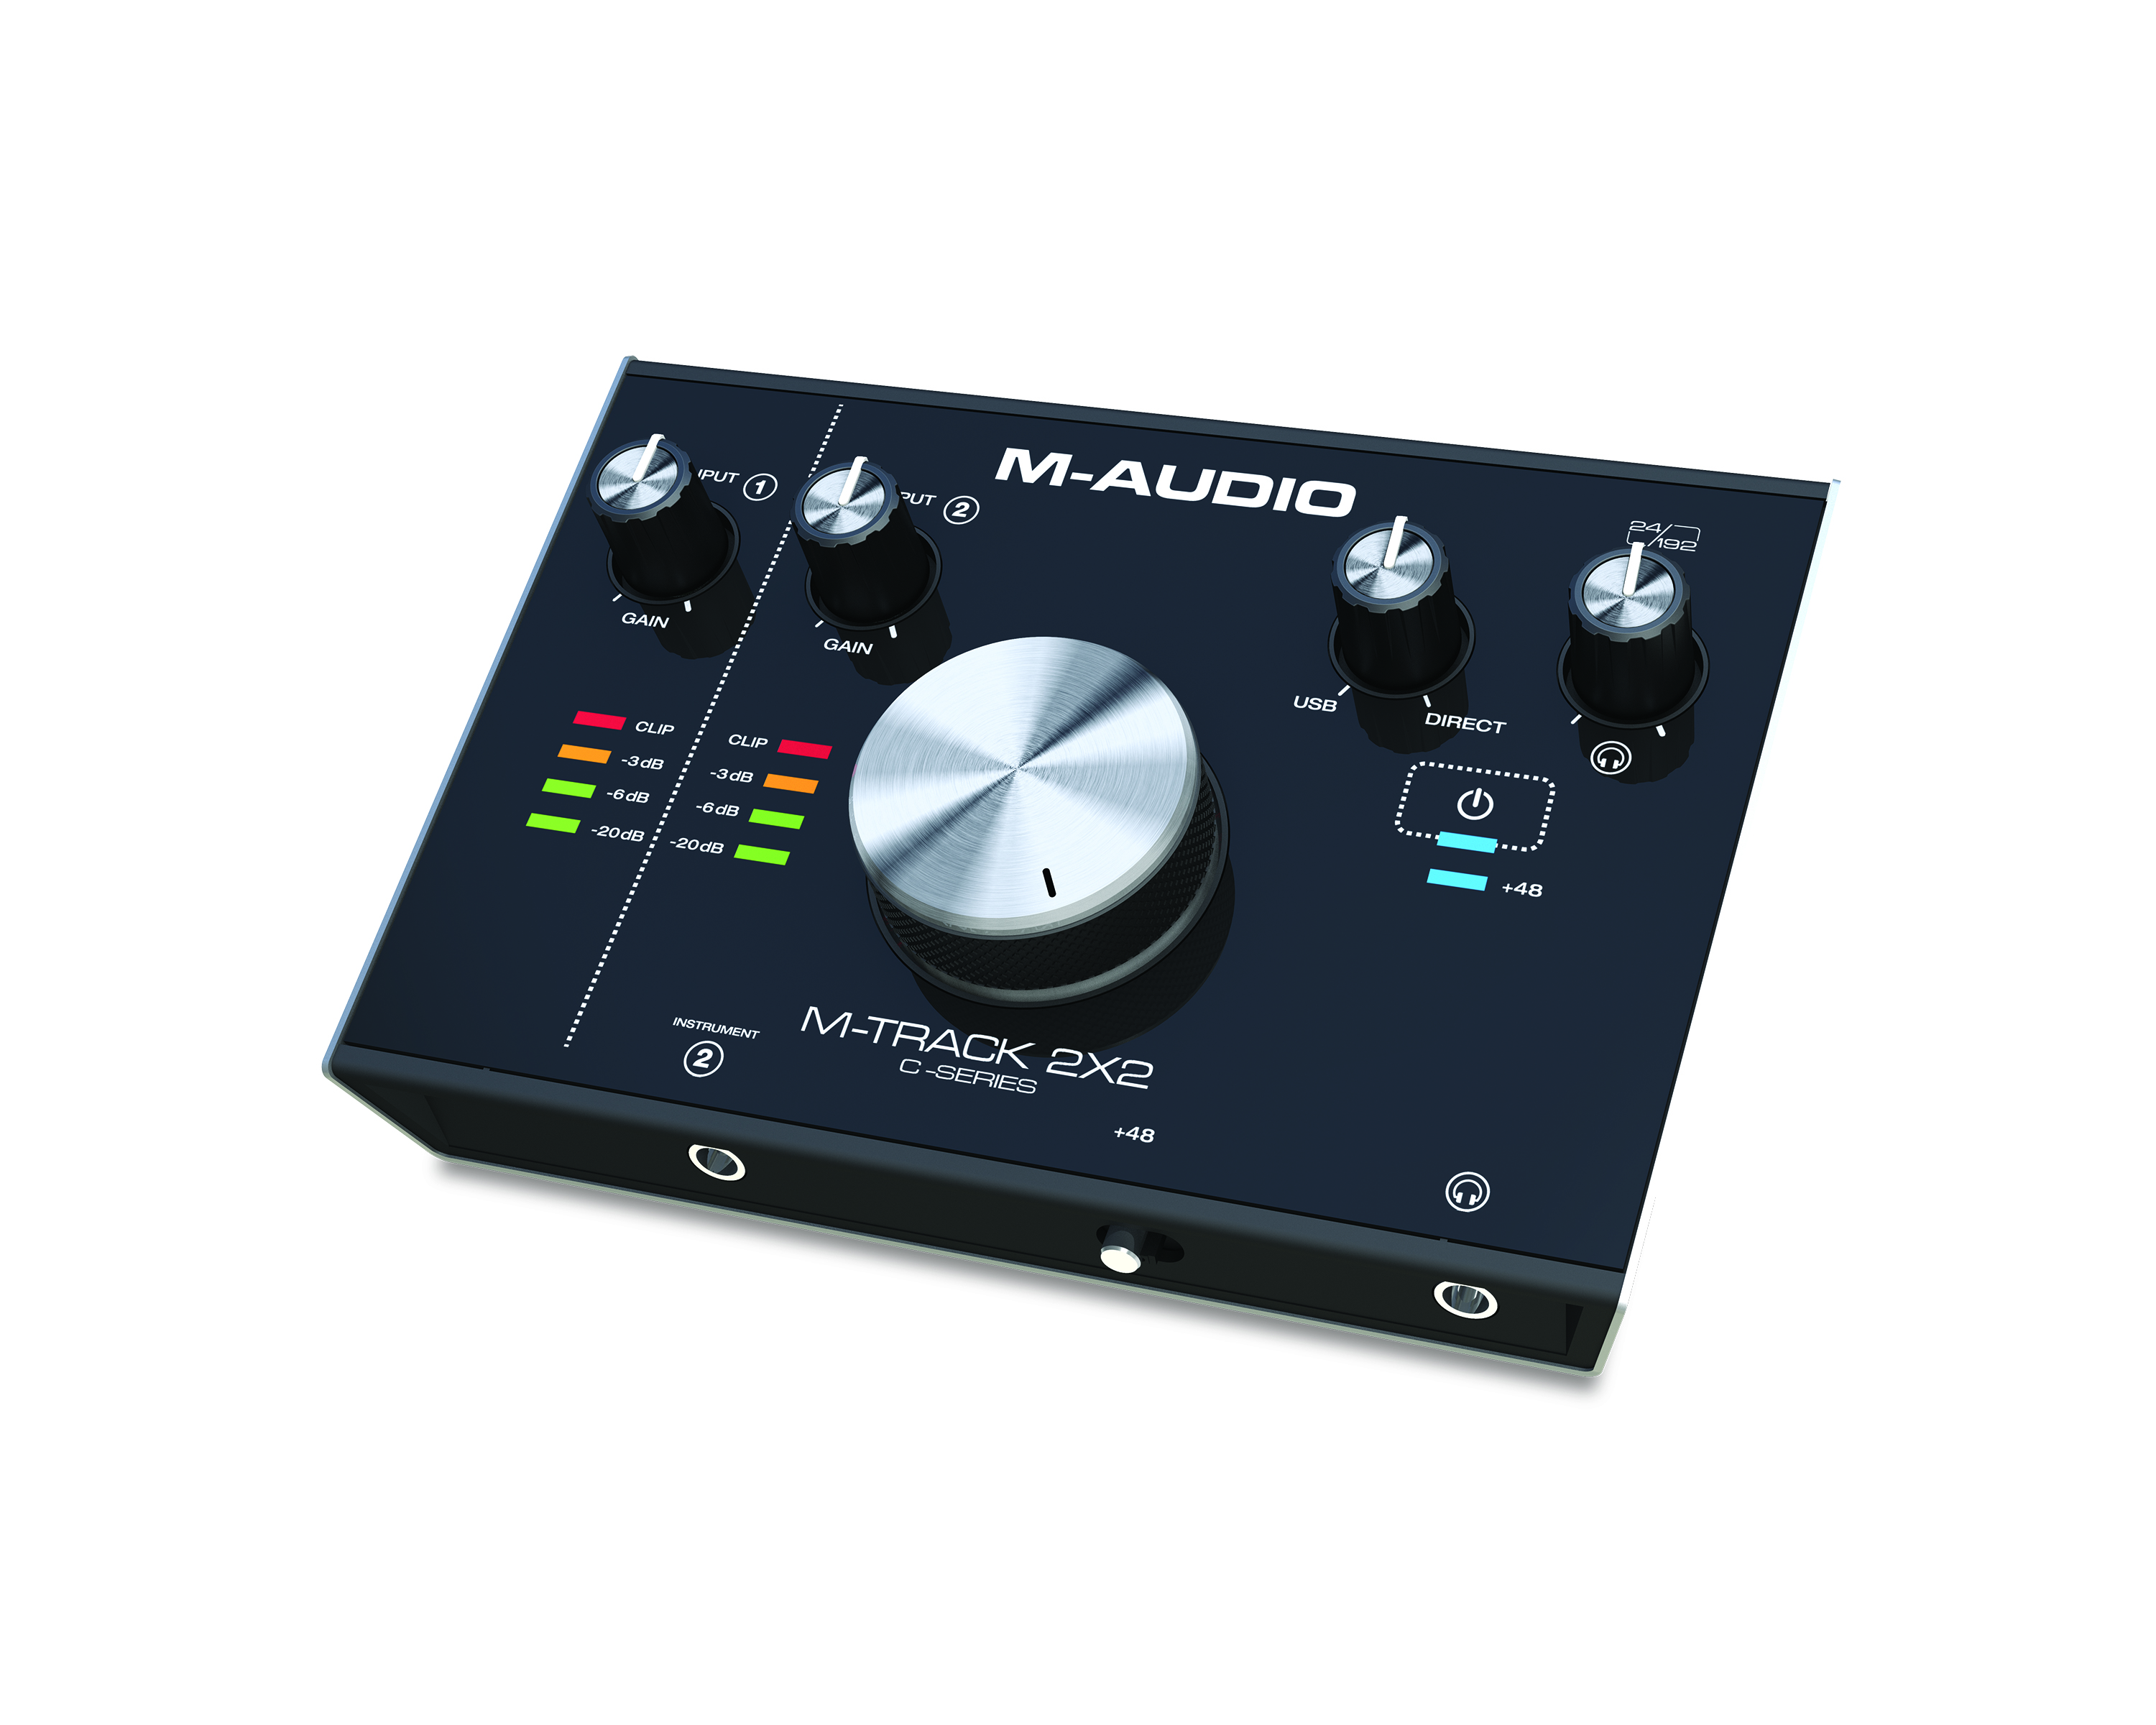 Midiplus 61 drivers for mac